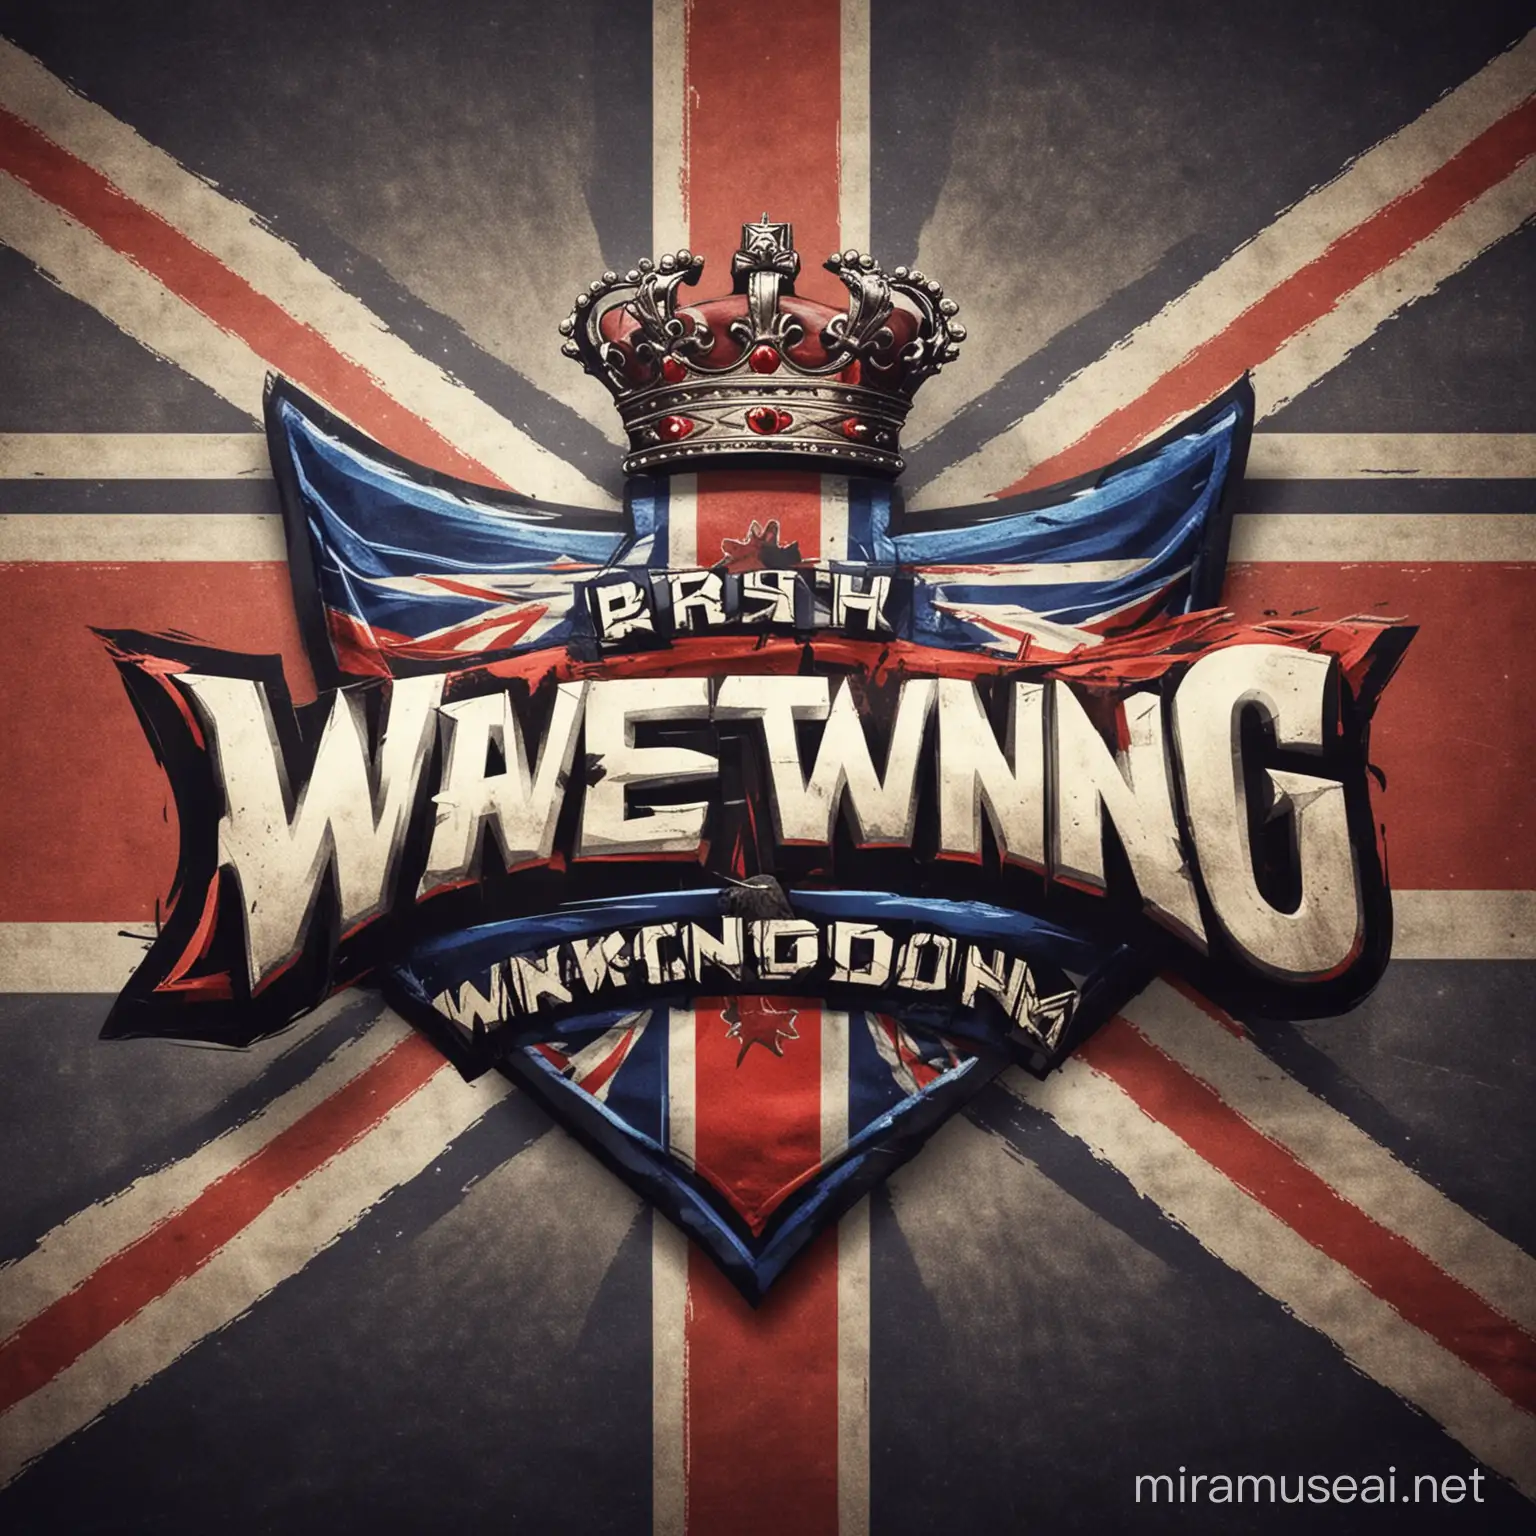 Show me a logo of a British wrestling company with the name "British Wrestling Kingdom"